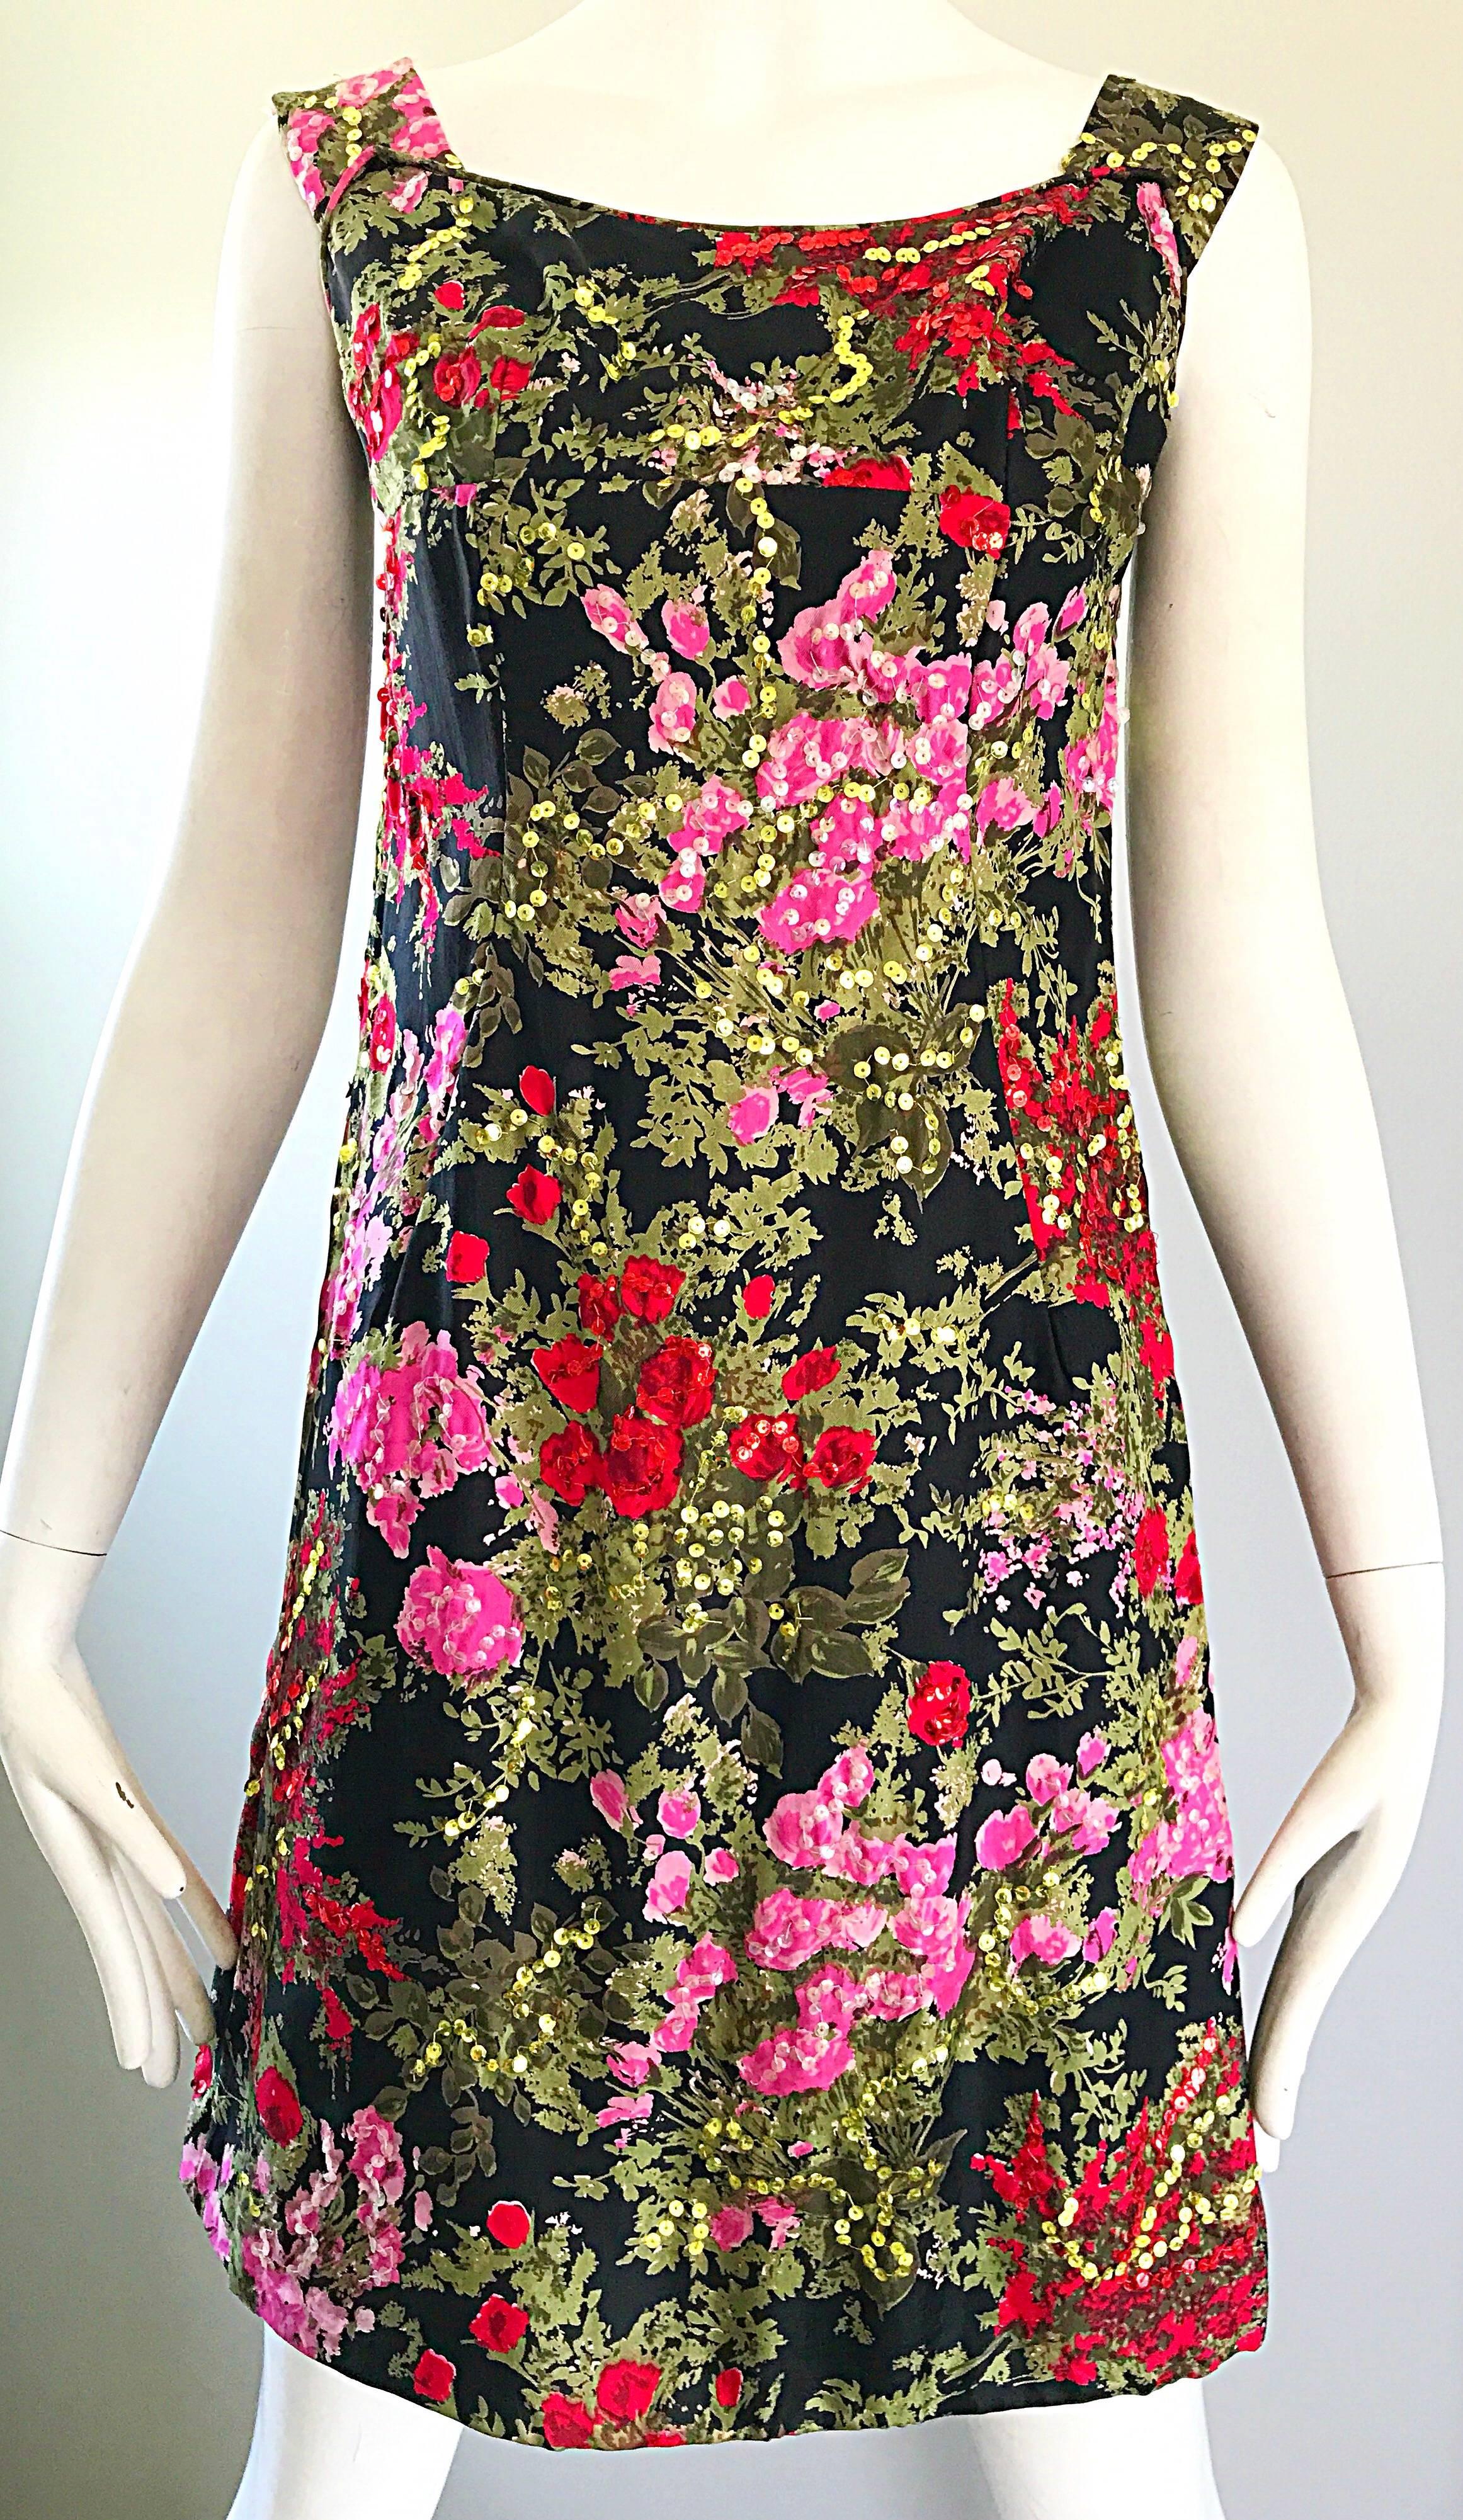 Women's 1960s Lord and Taylor Black + Pink + Red Silk Sequin Vintage 60s Shift Dress